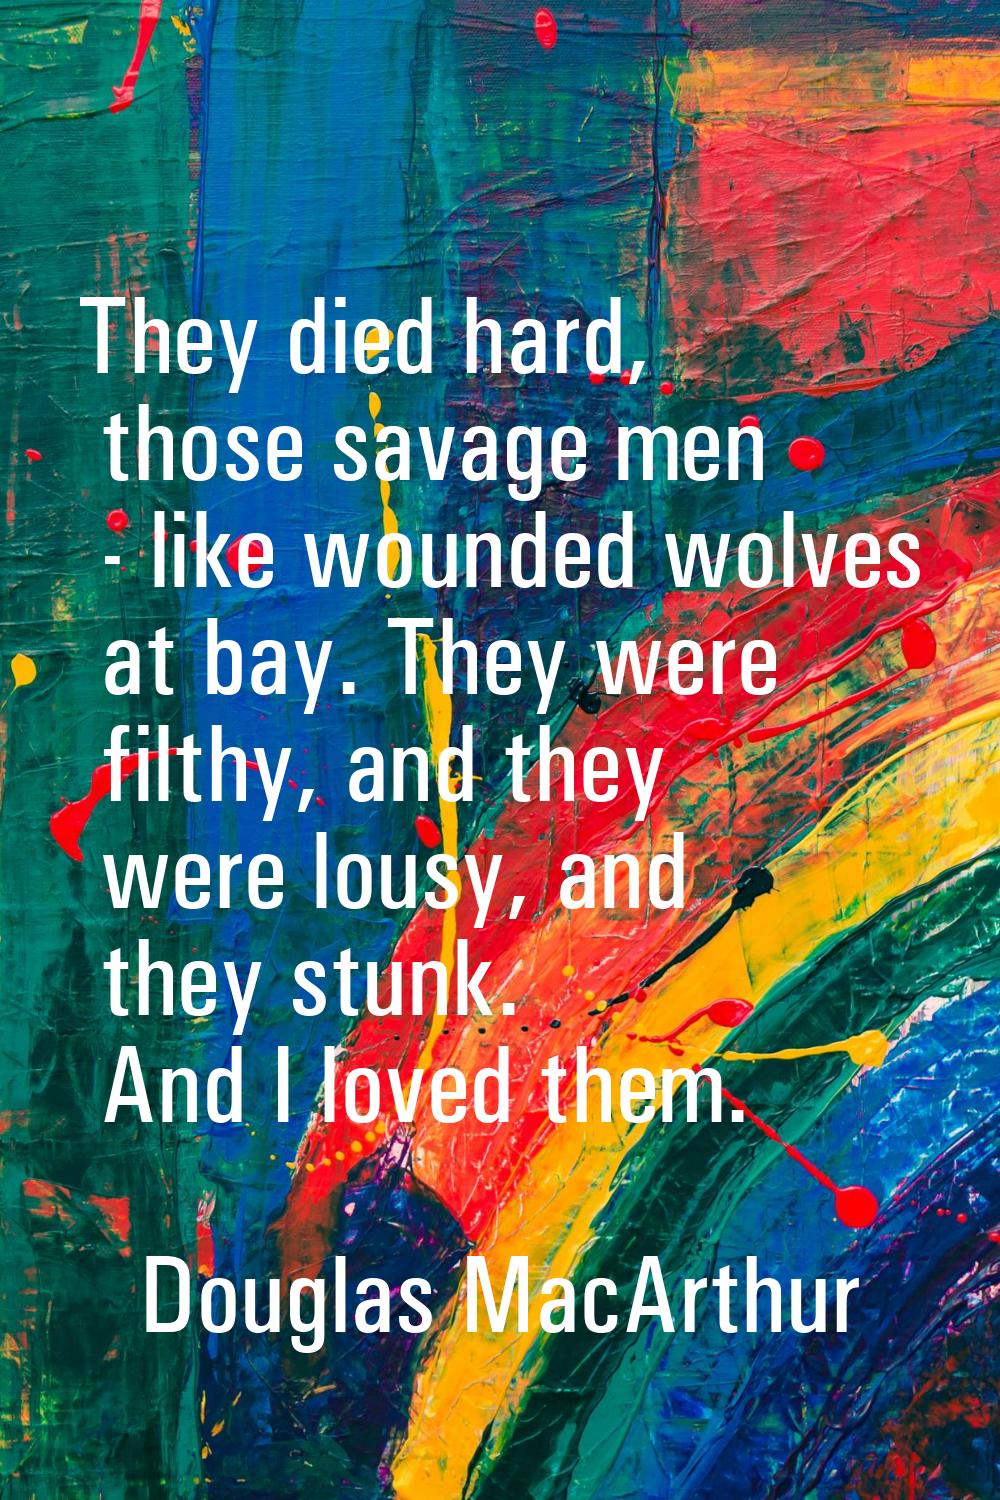 They died hard, those savage men - like wounded wolves at bay. They were filthy, and they were lous